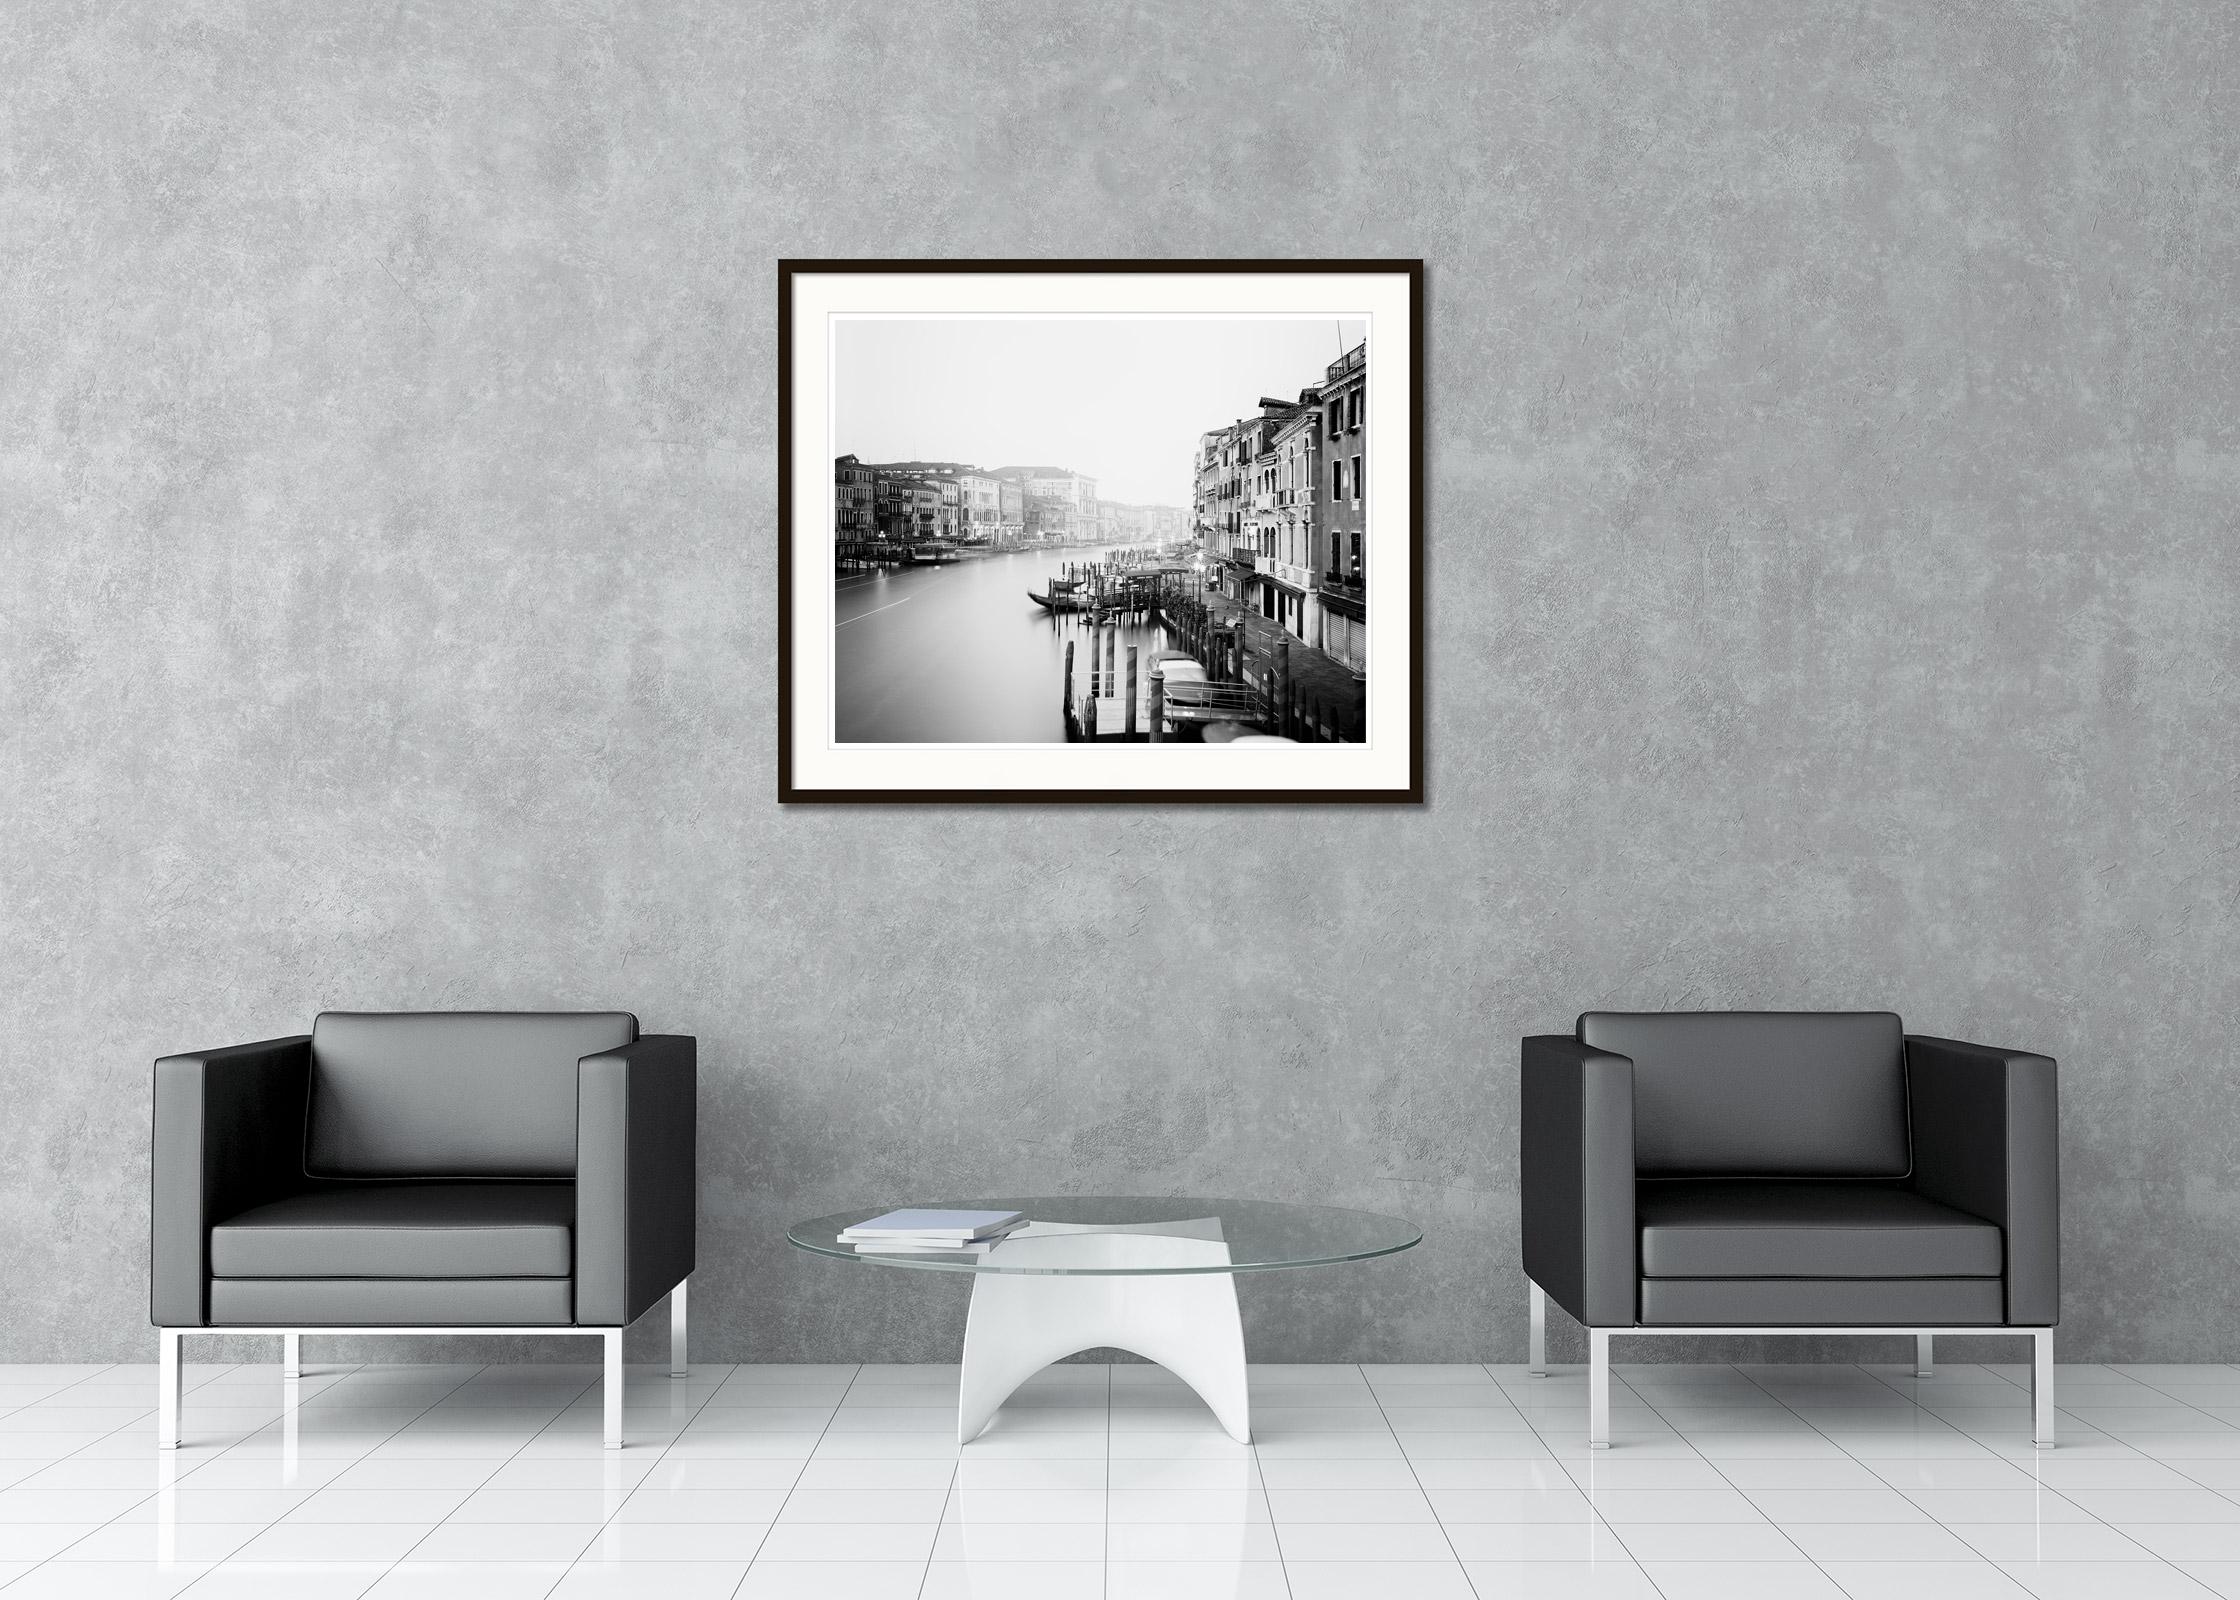 Black and White Fine Art Long Exposure Cityscape Photography. Grand Canal View from Rialto Bridge, Venice, Italy. Archival pigment ink print, edition of 7. Signed, titled, dated and numbered by artist. Certificate of authenticity included. Printed